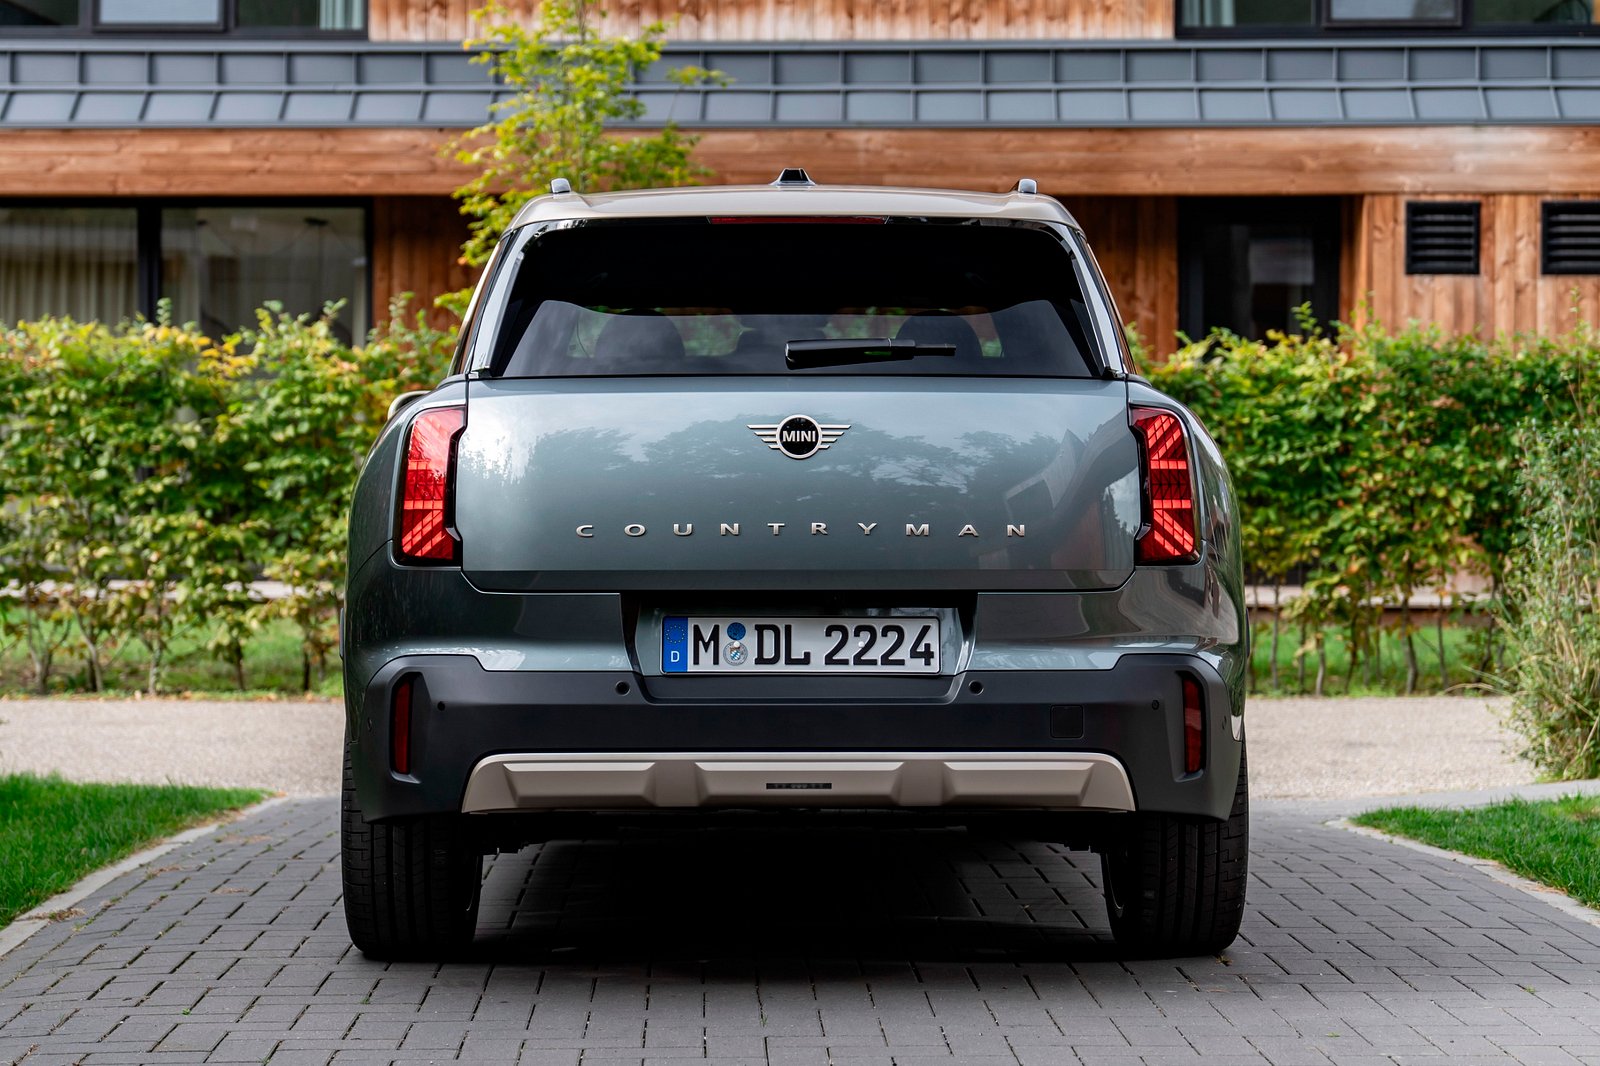 Mini Countryman C Entry-Level Crossover Revealed With Budget-Minded ...